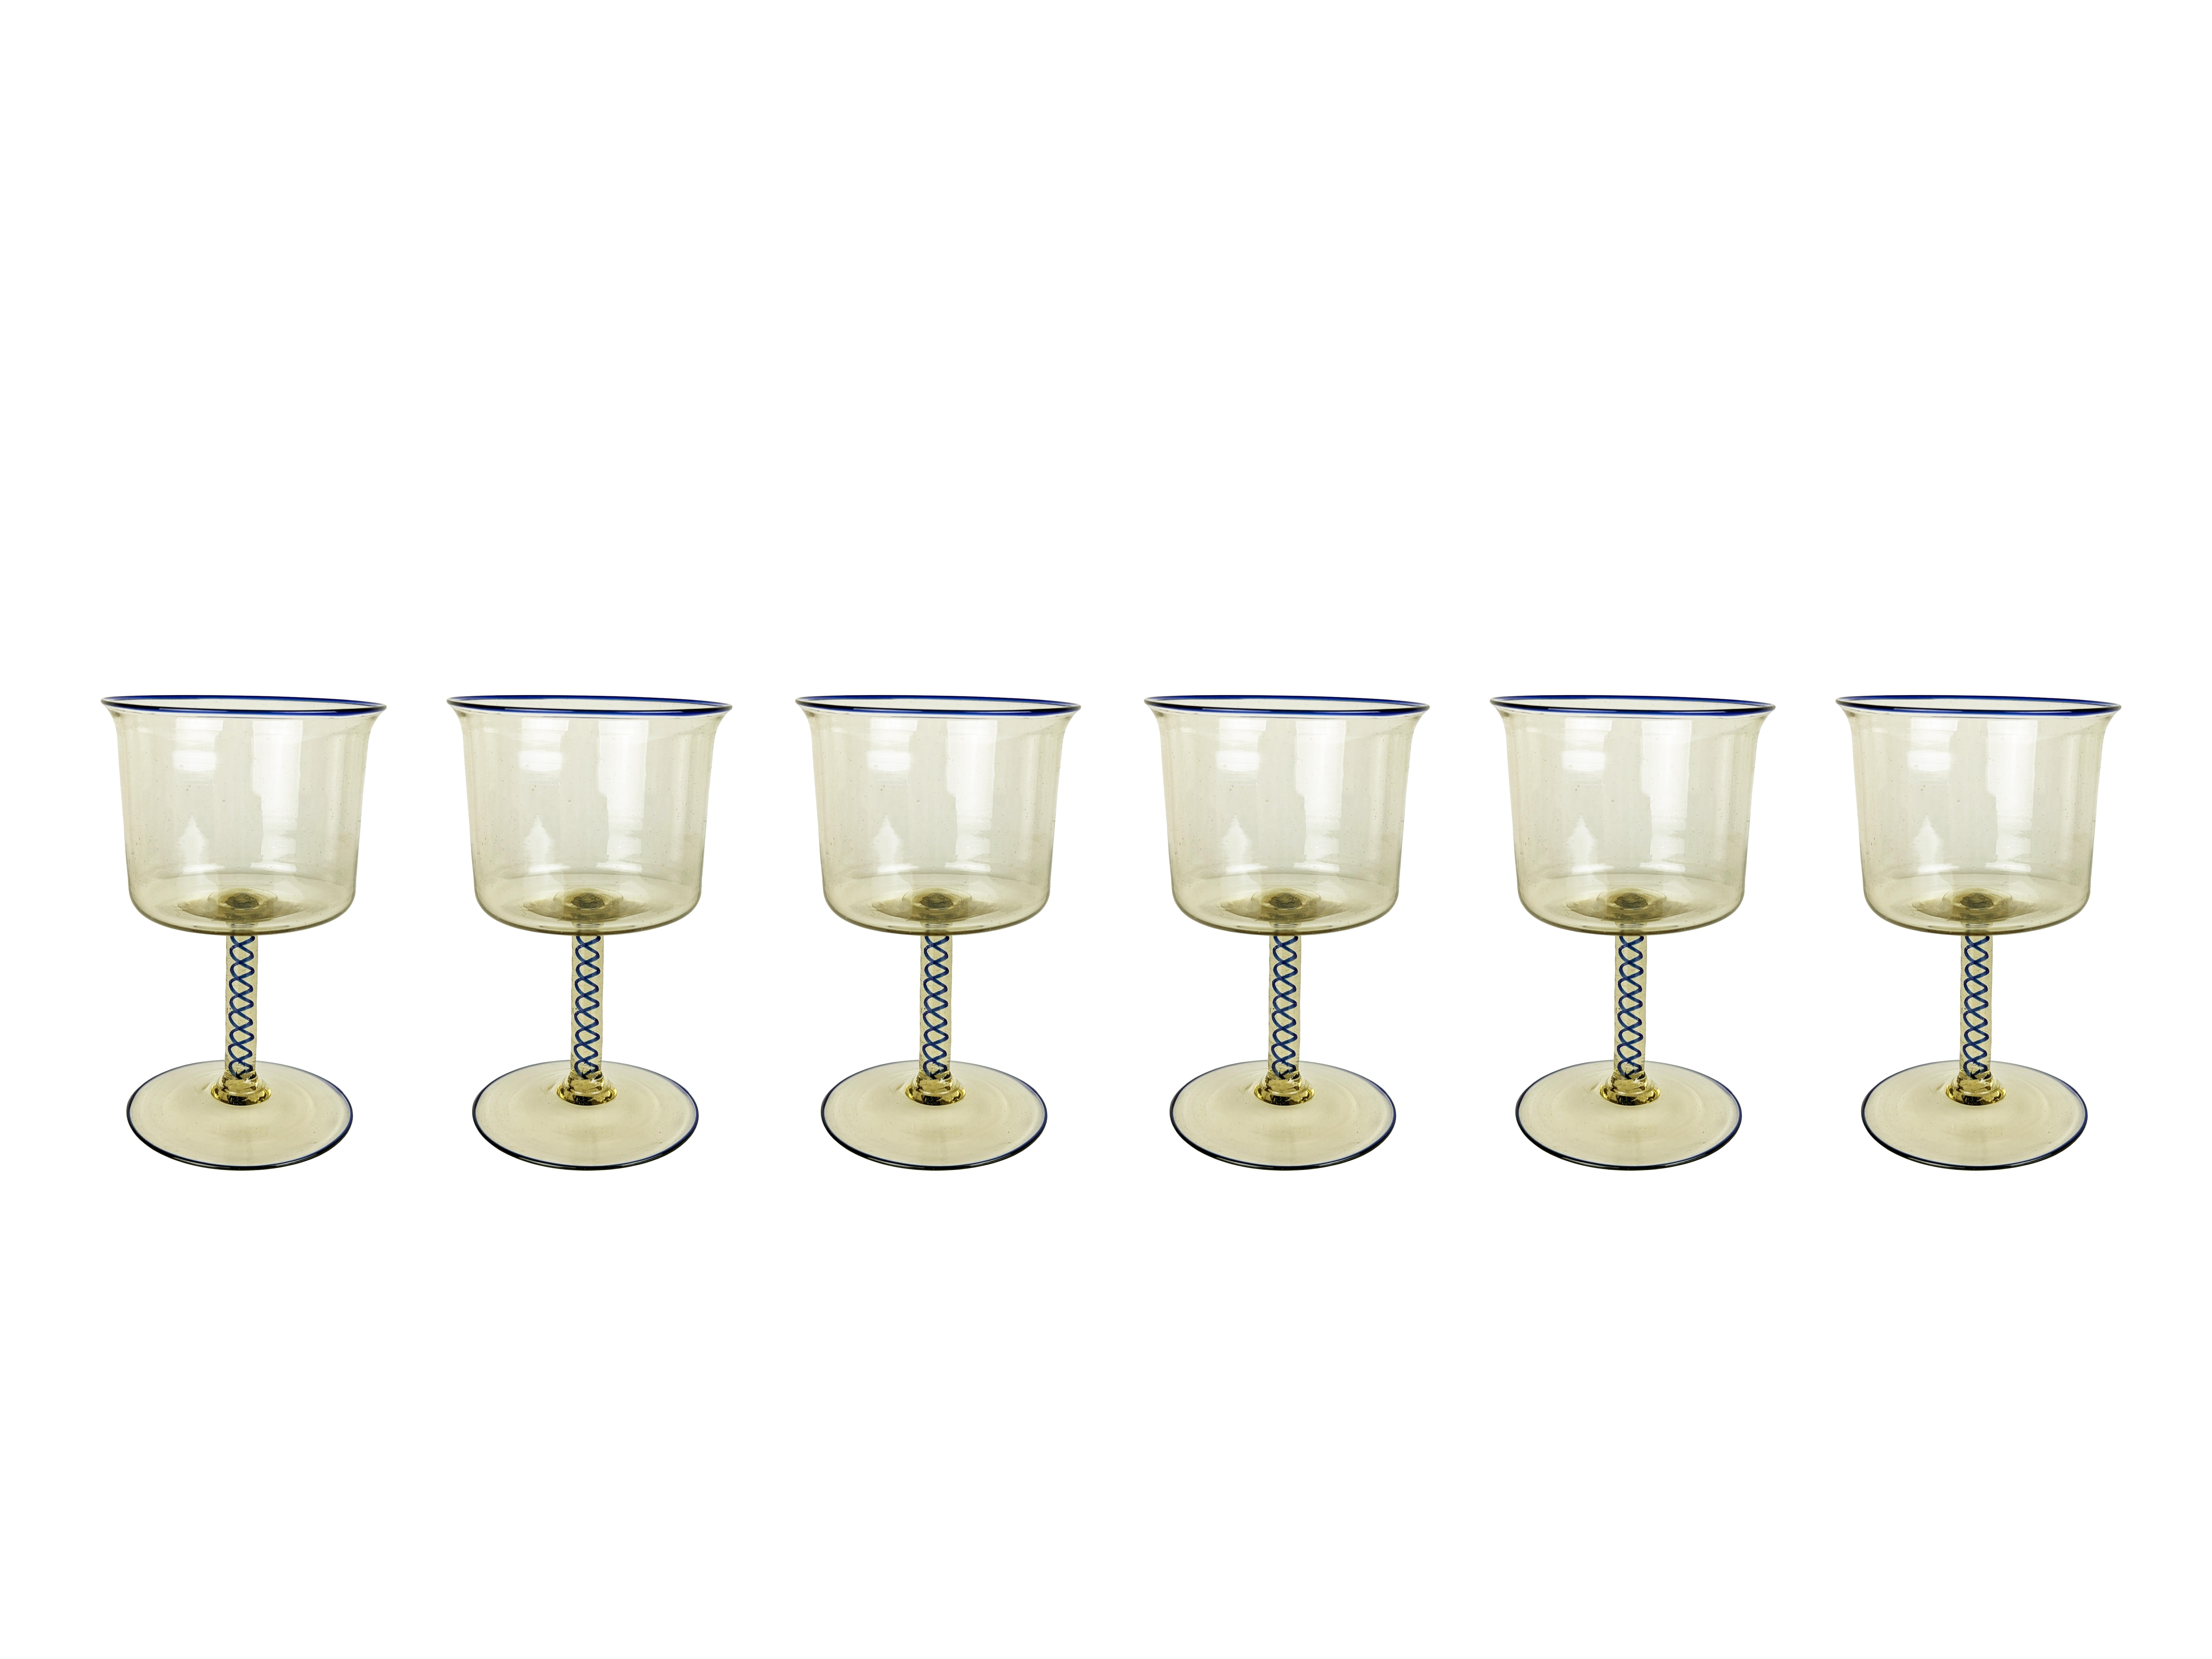 rare set of 18 Murano glass goblets by Vittorio Zecchin for Pauly & Co, 1930s For Sale 8